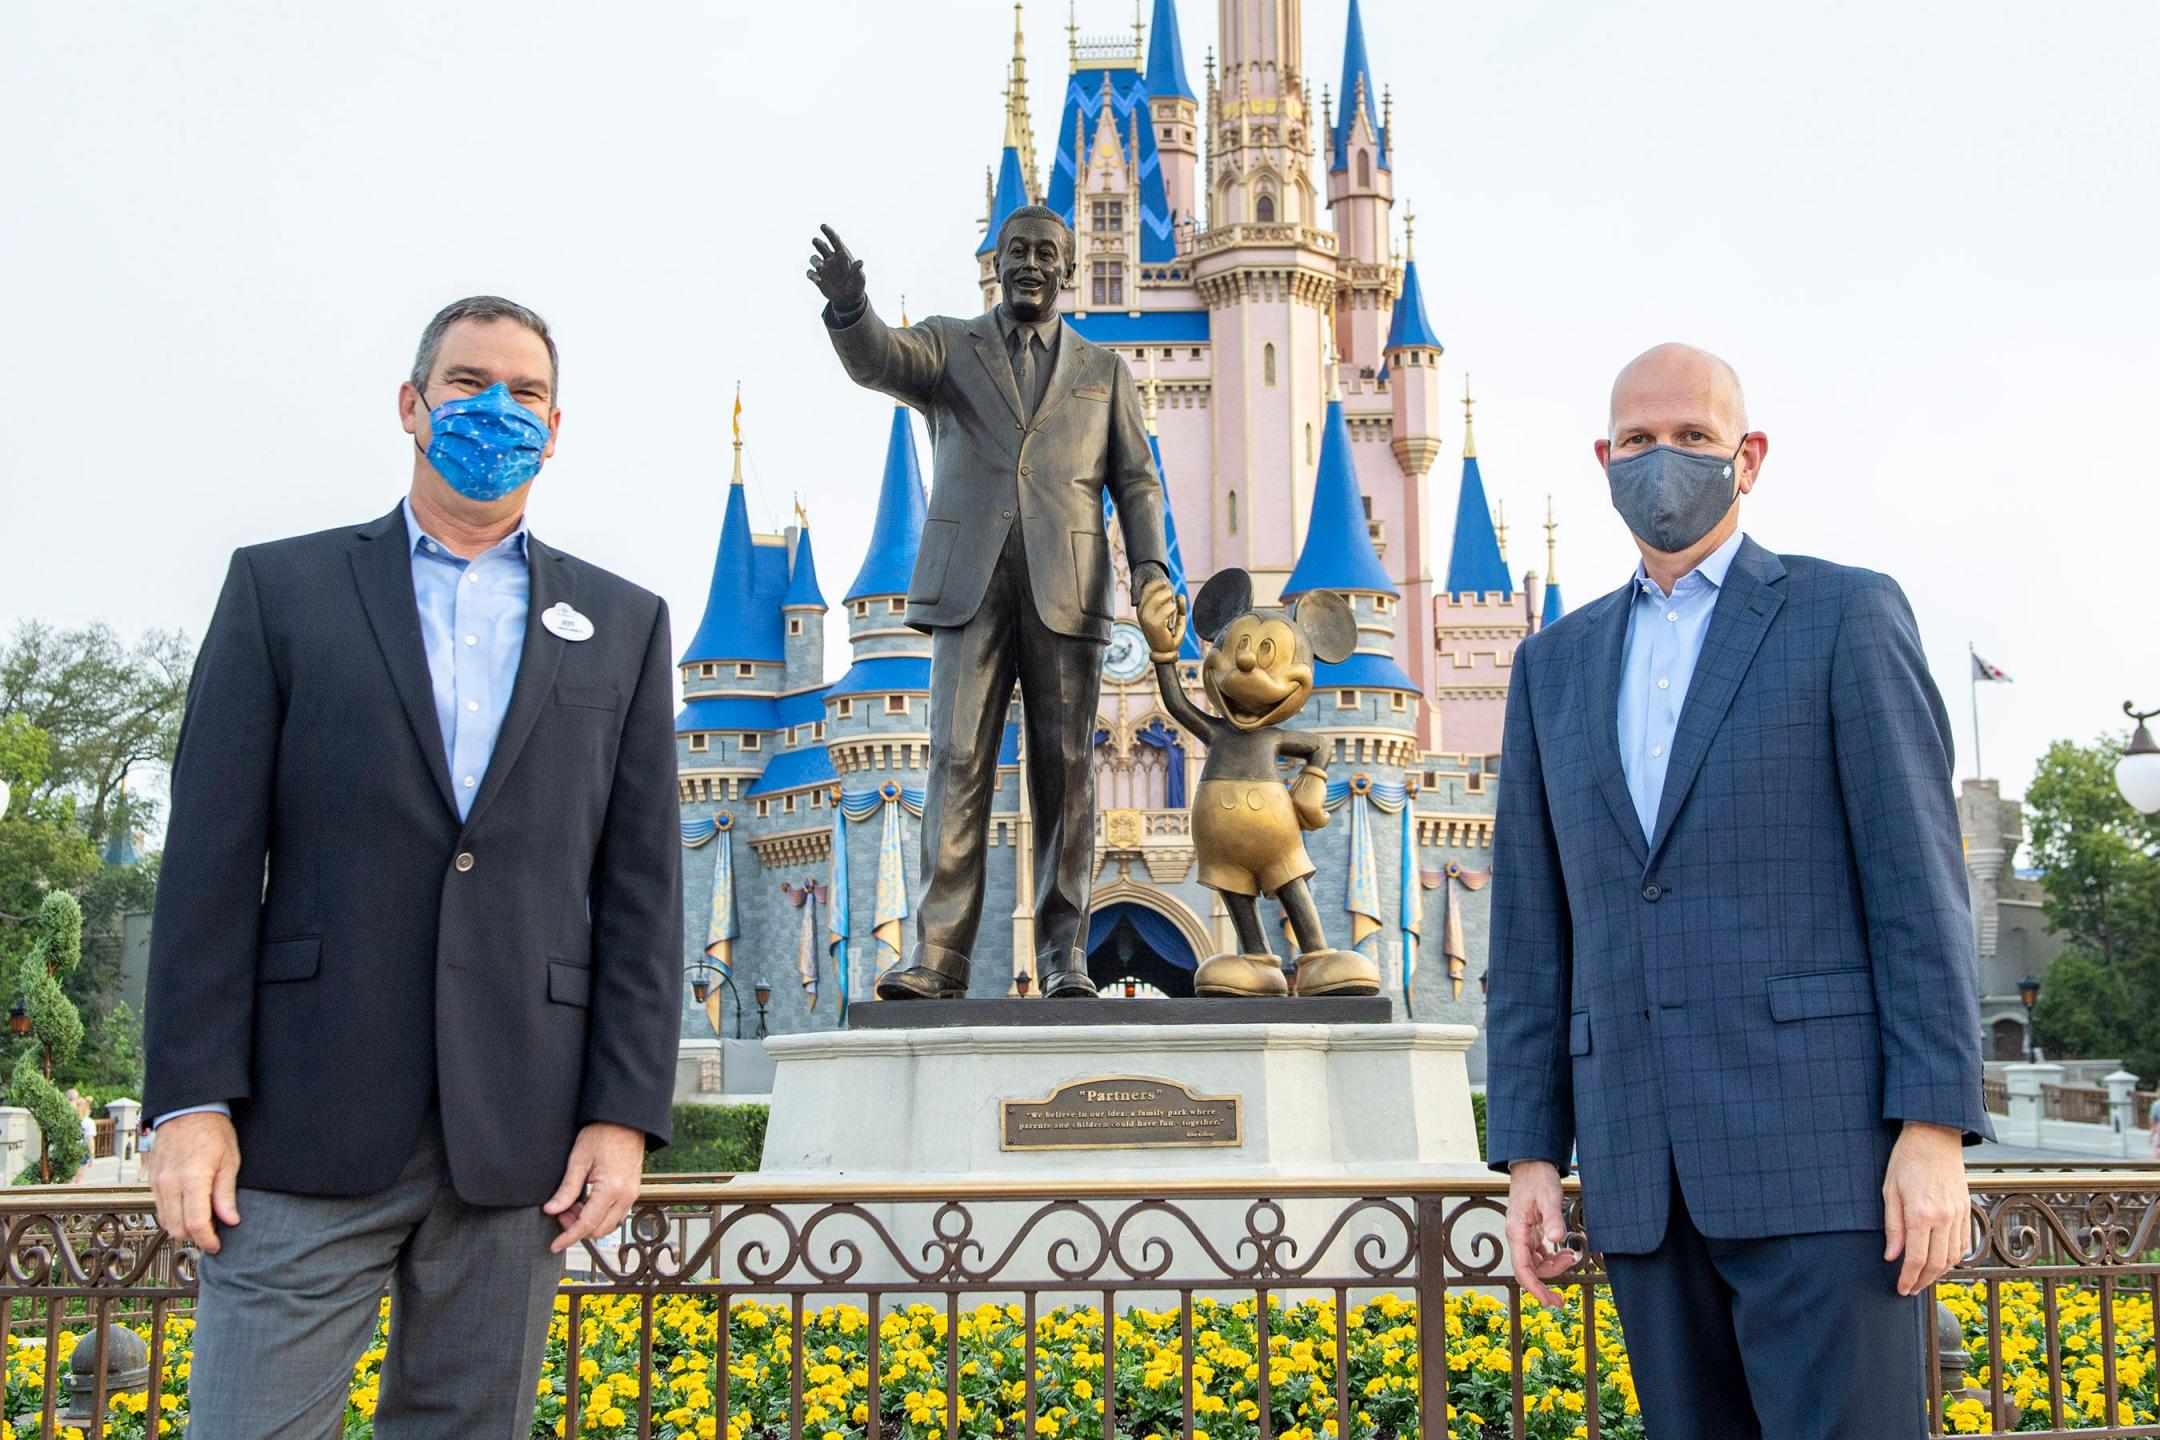 Church-owned AdventHealth has struck an Alliance with the Diabolical Disney  Corporation